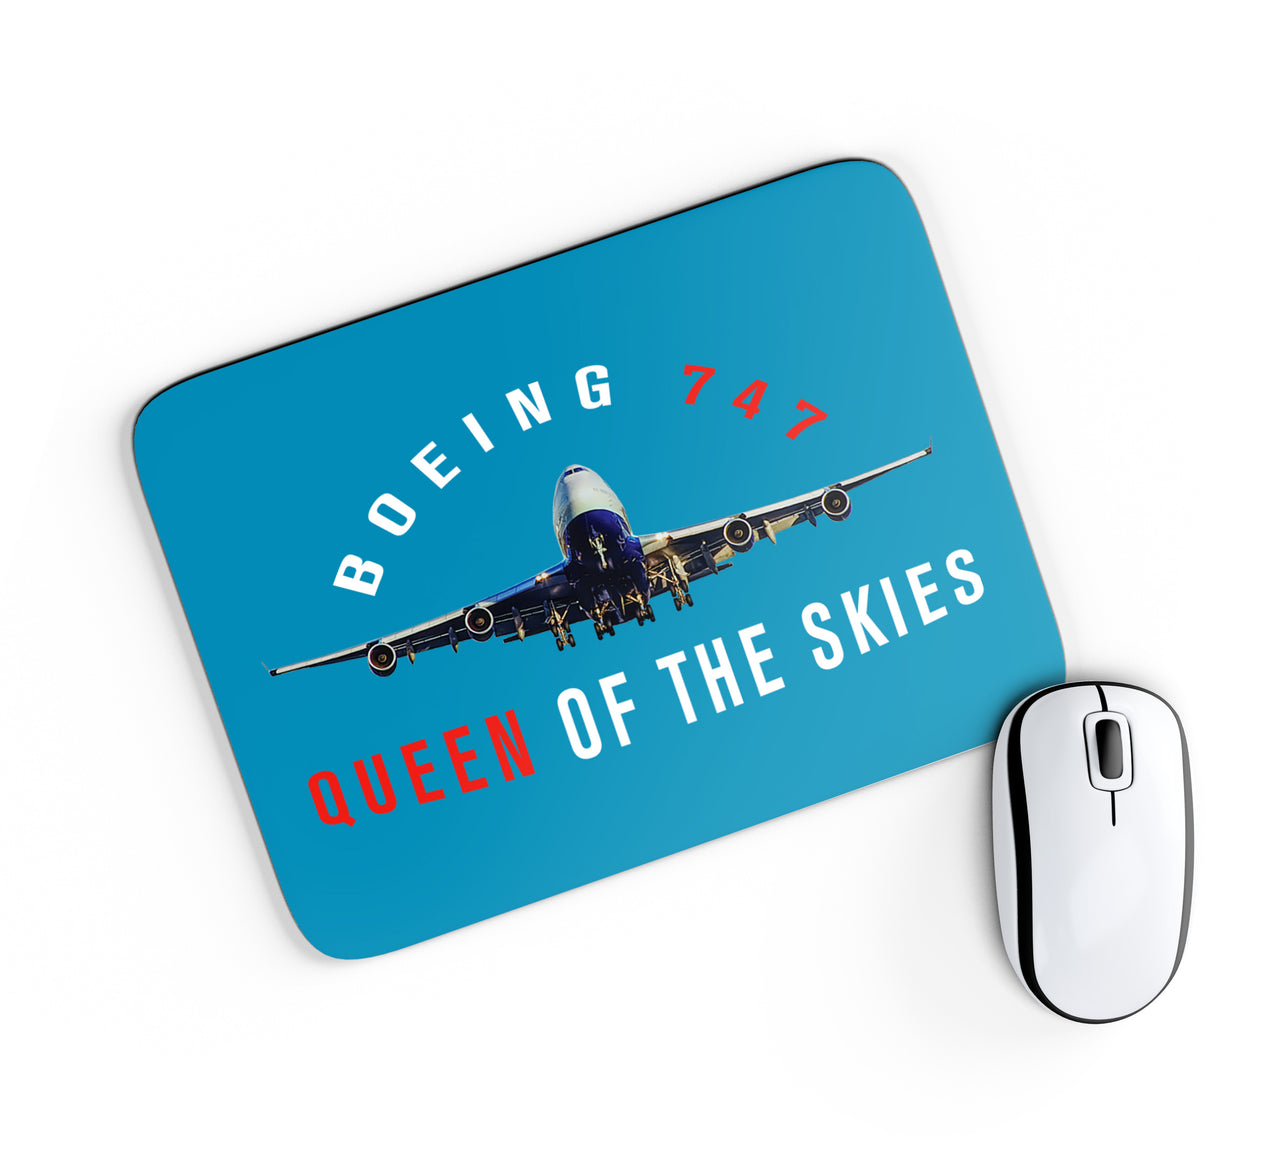 Boeing 747 Queen of the Skies Designed Mouse Pads